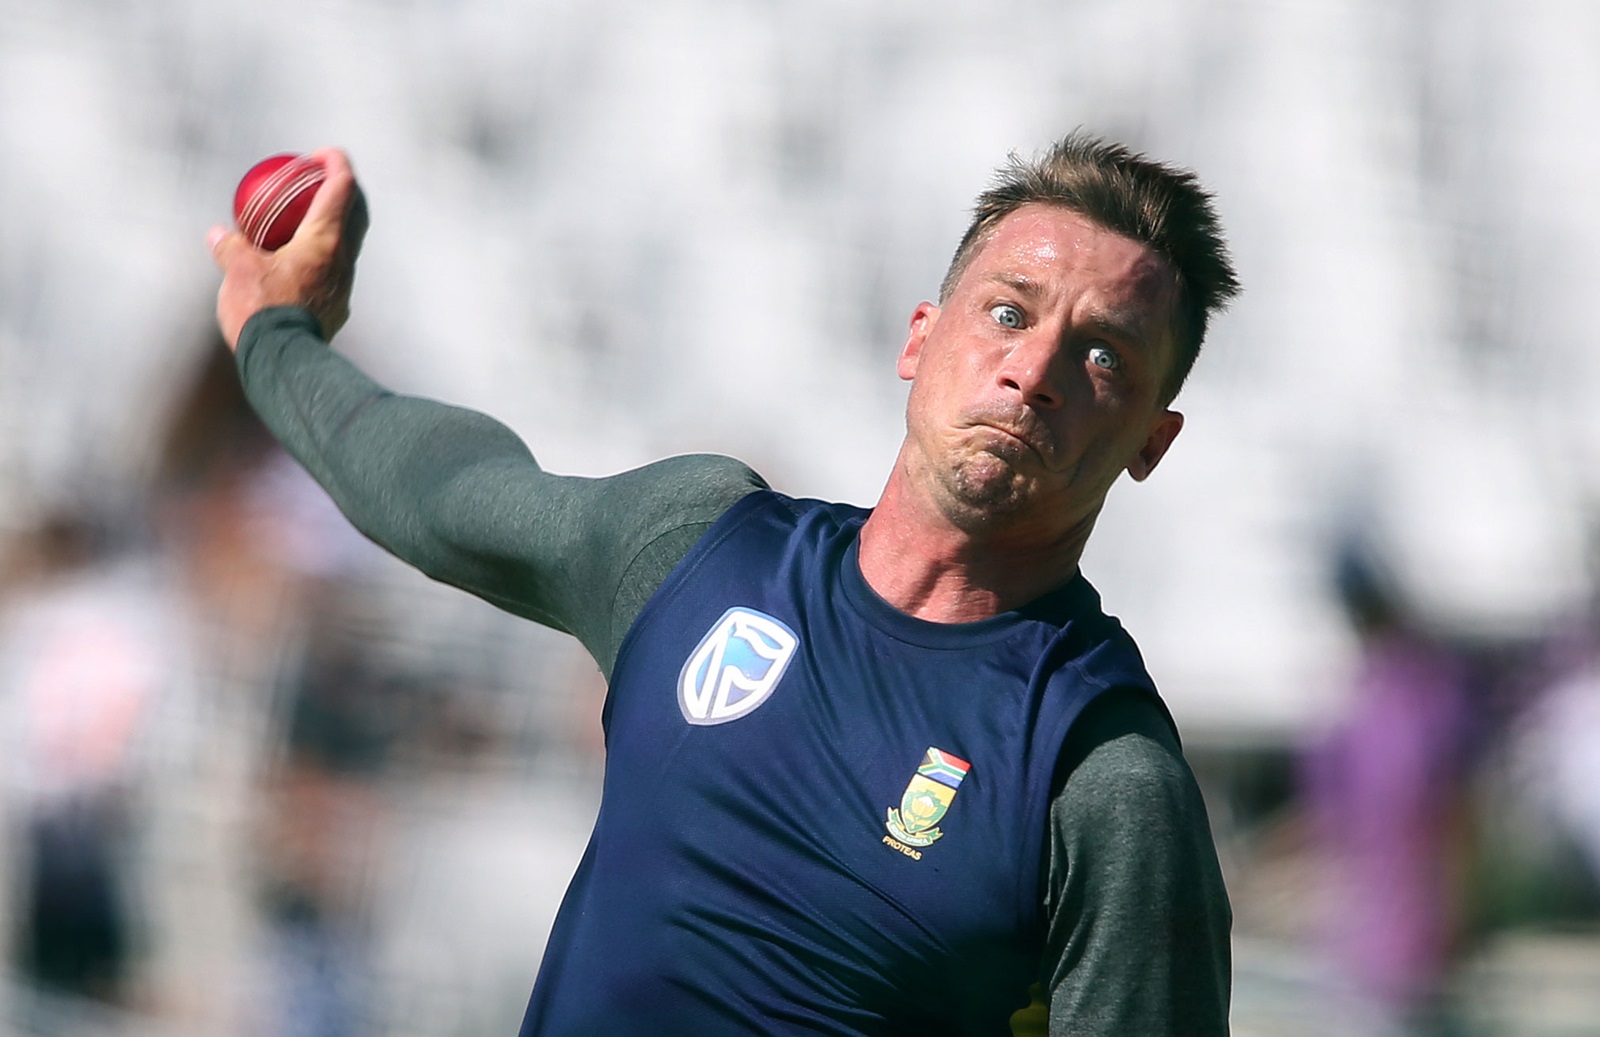 Shaun Pollock picked Dale Steyn in the ICC World Cup 2019 squad